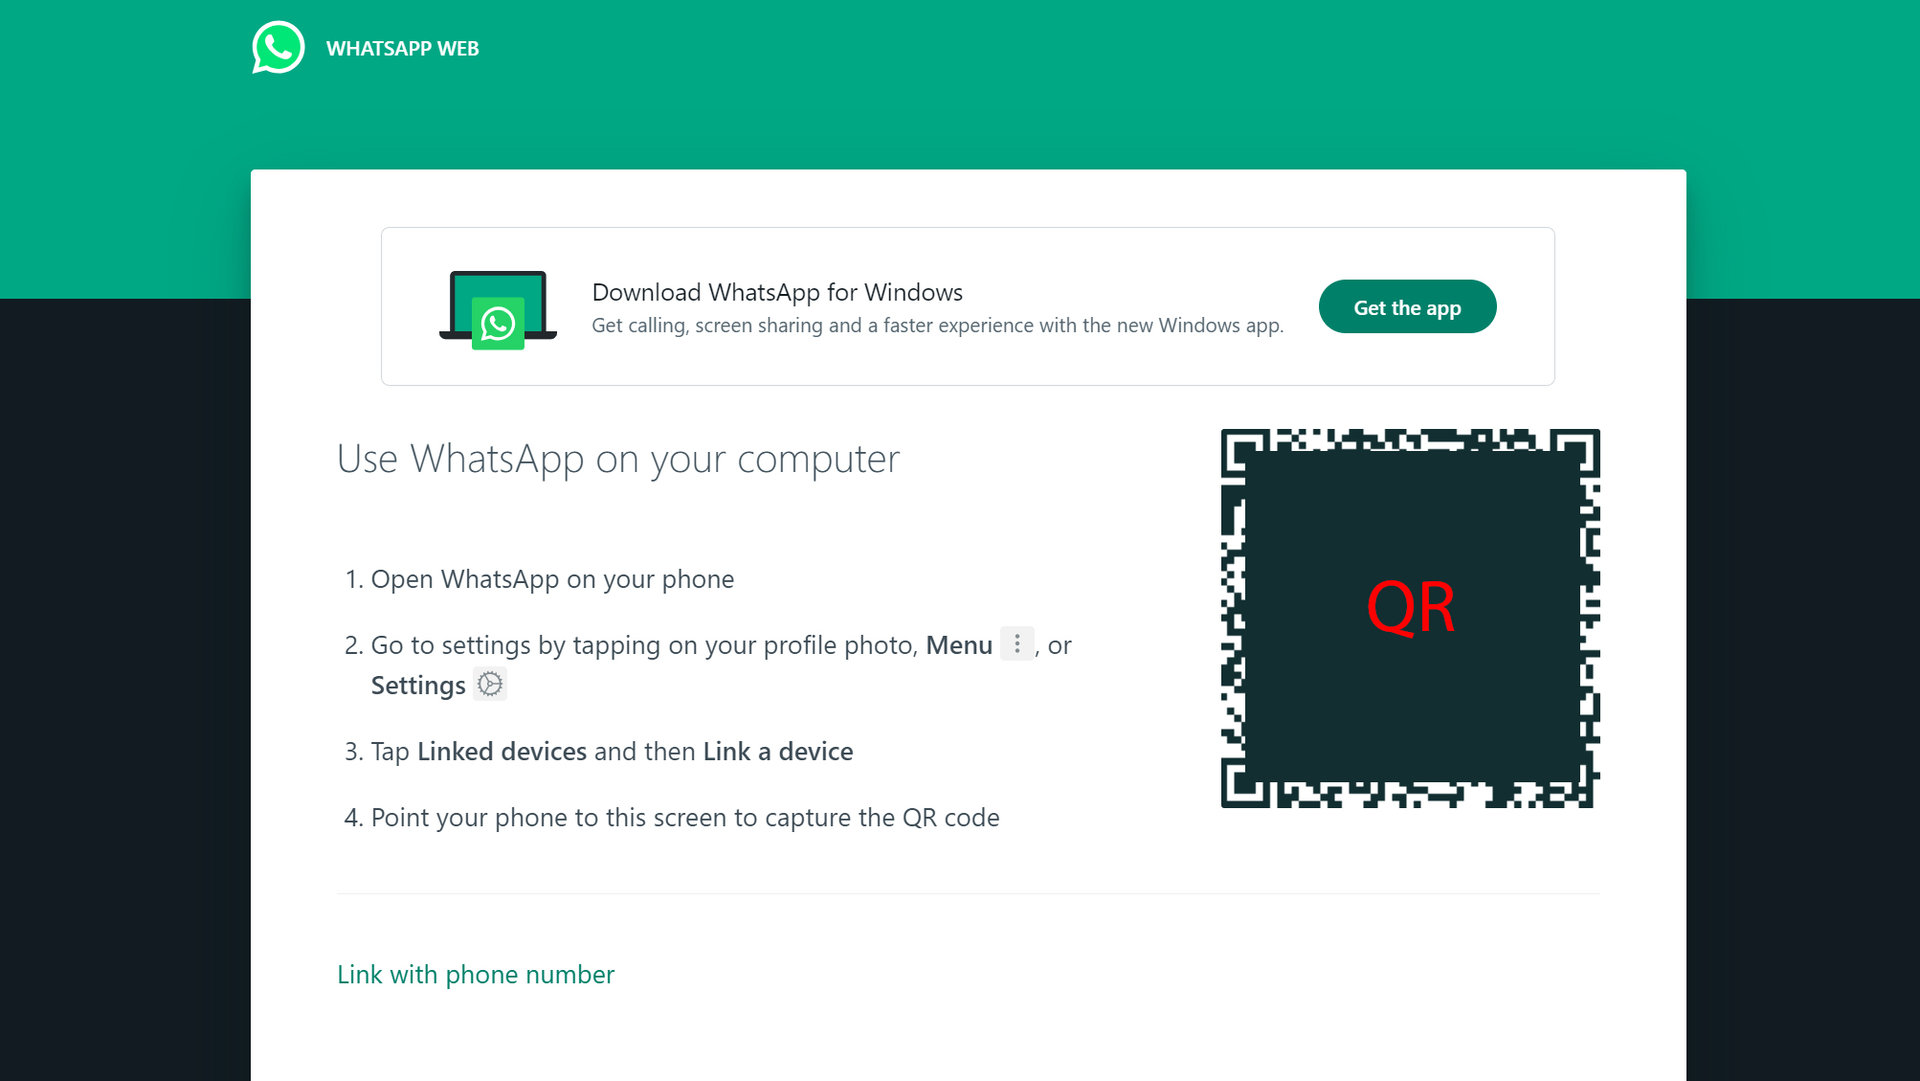 How to access and use WhatsApp Web (1)